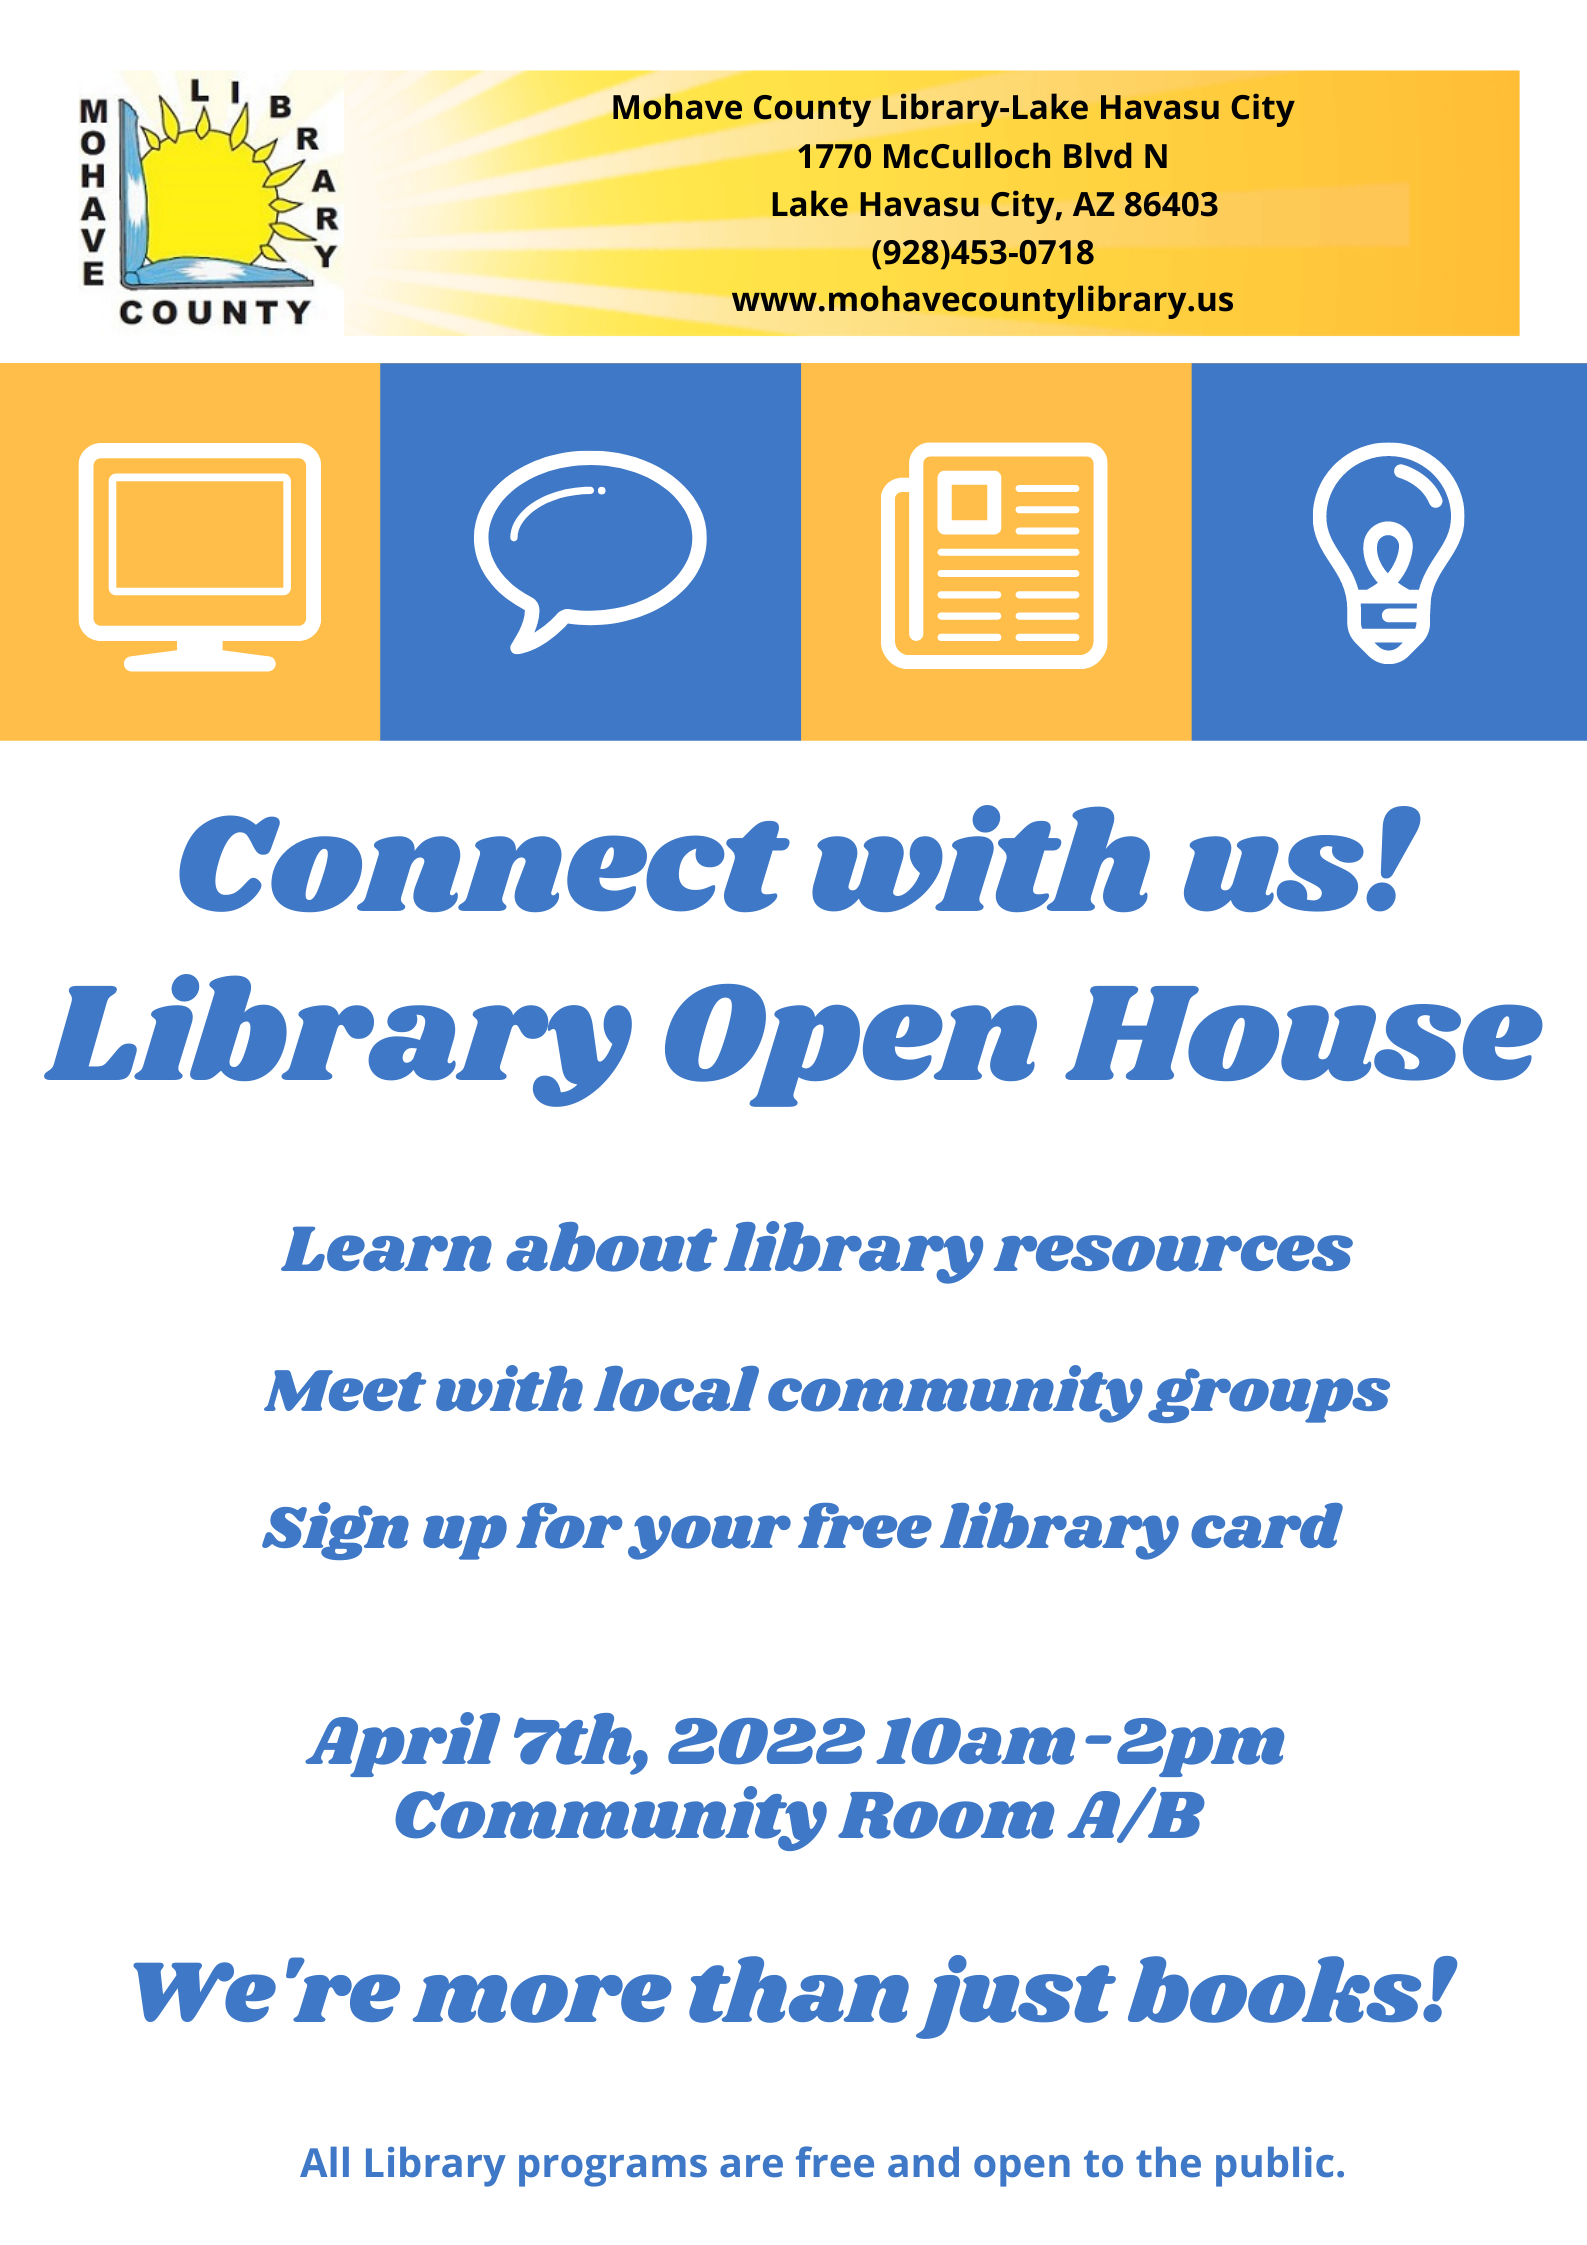 Library Open House “Connect with Your Library”